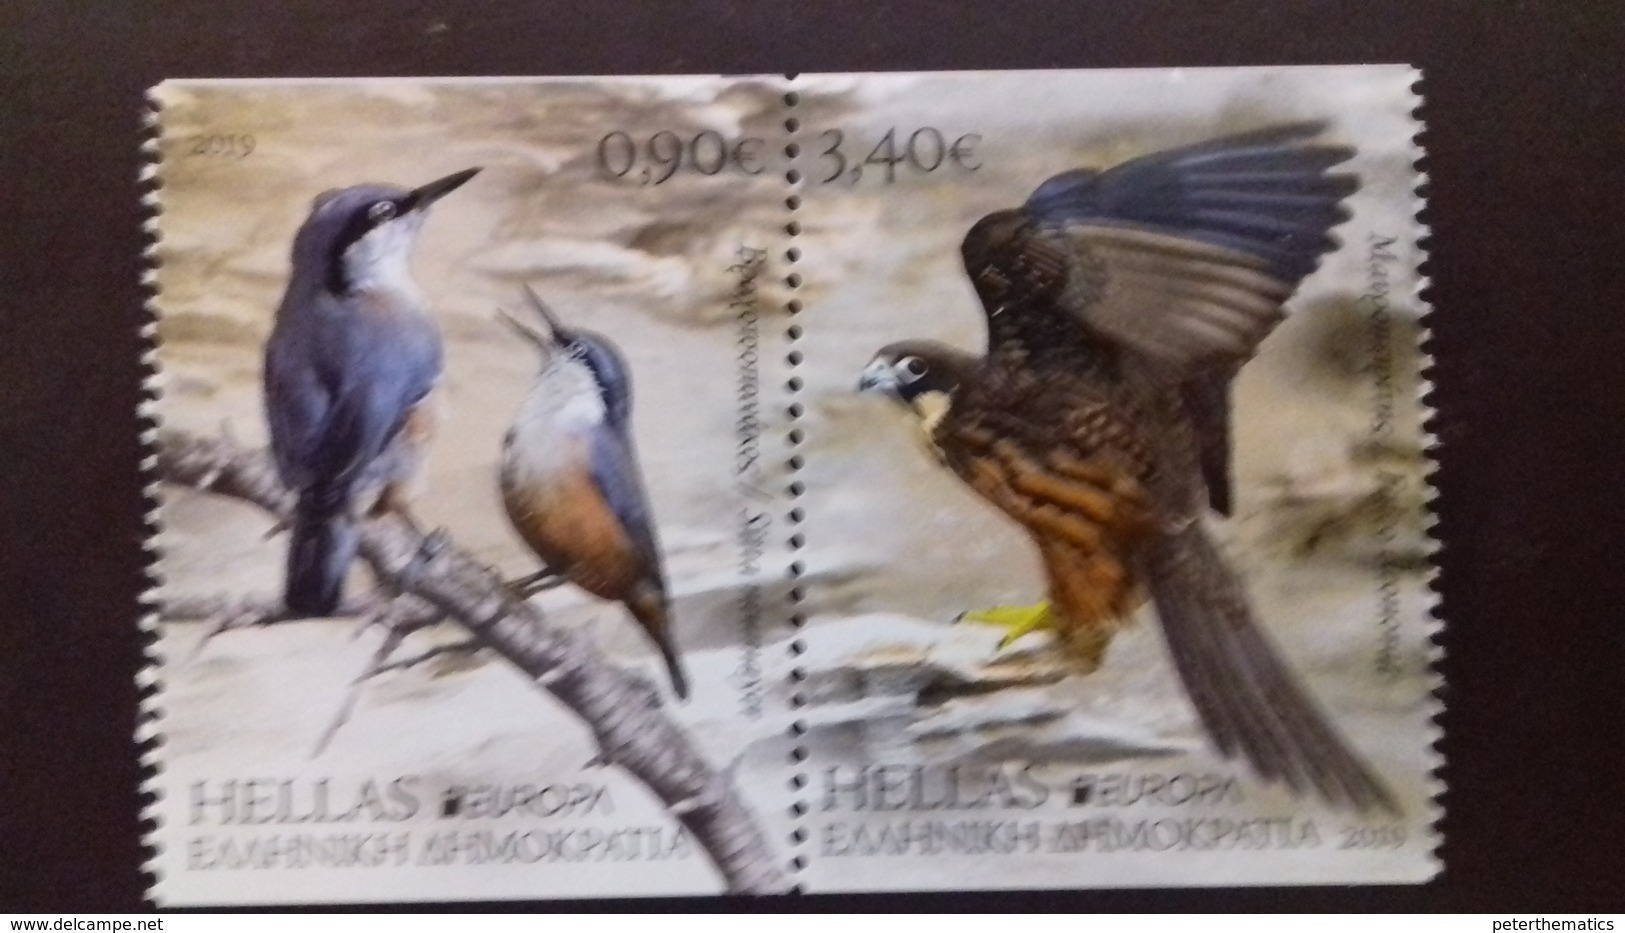 GREECE, 2019, MNH, BIRDS, EUROPA 2019,HAWK S, KINGFISHERS,  2v IMPERFORATE Ex. BOOKLET - 2019